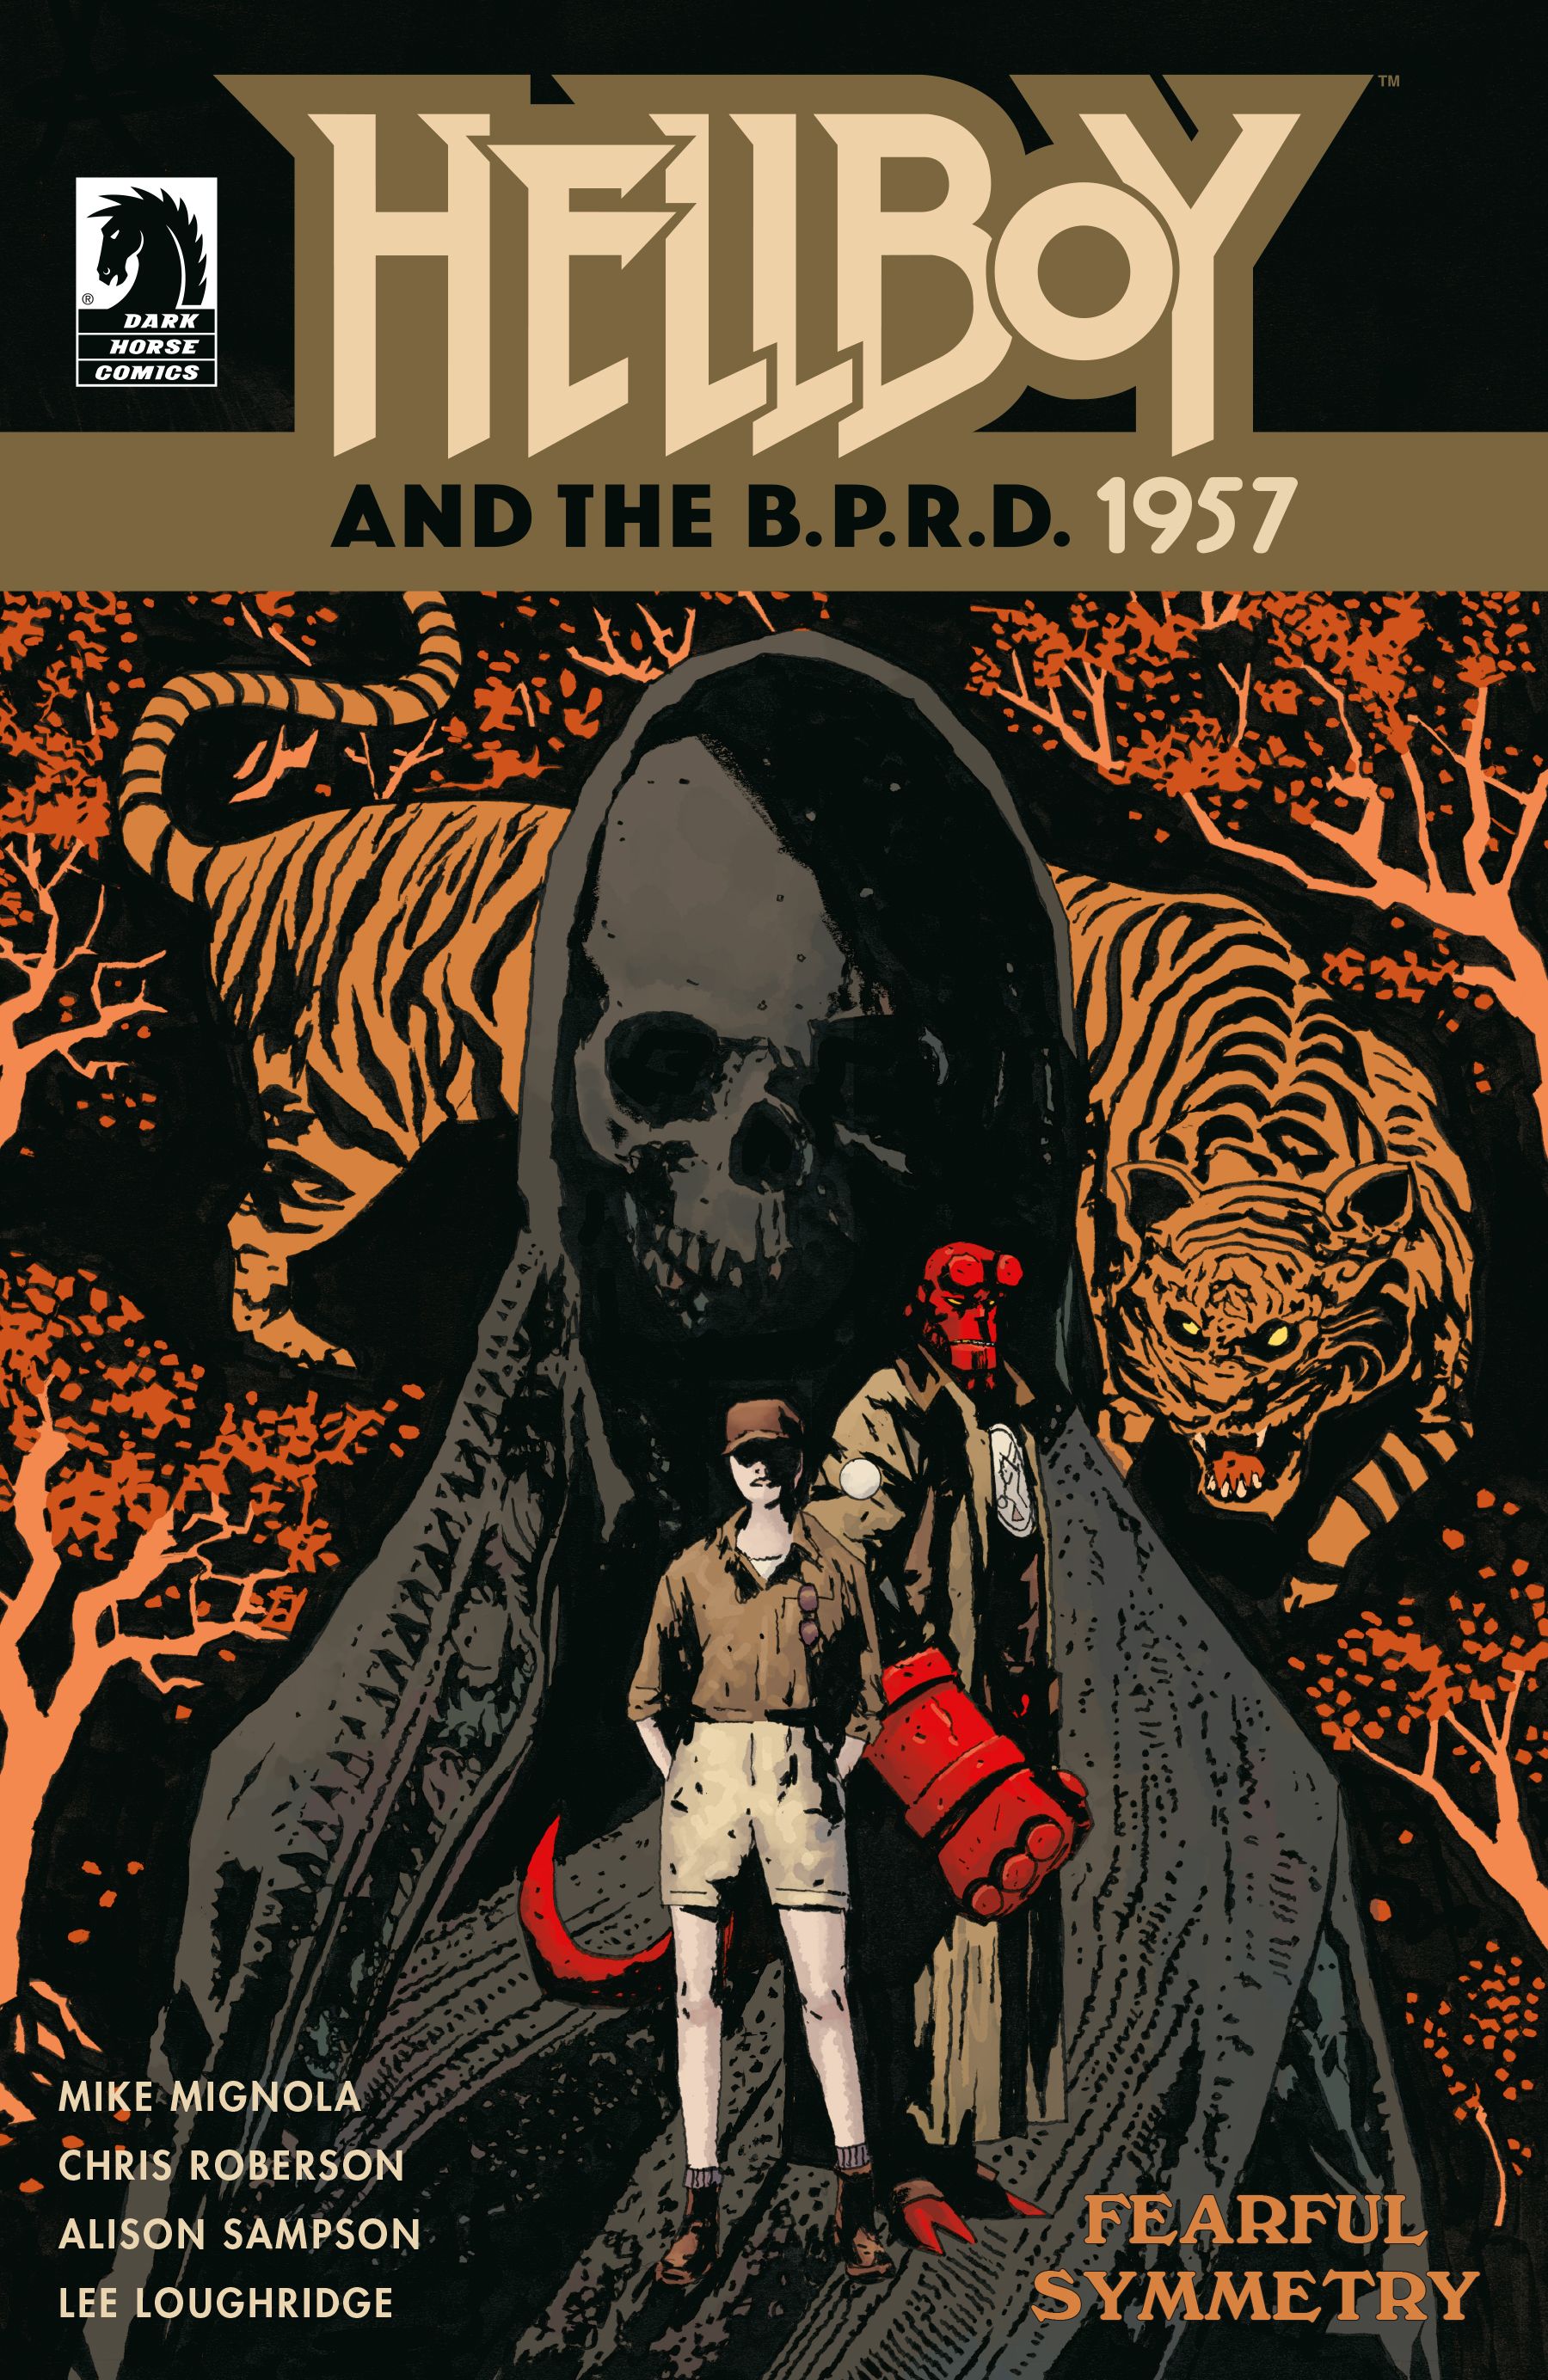 Cover A of Hellboy and the B.P.R.D. 1957 - Fearful Symmetry #1